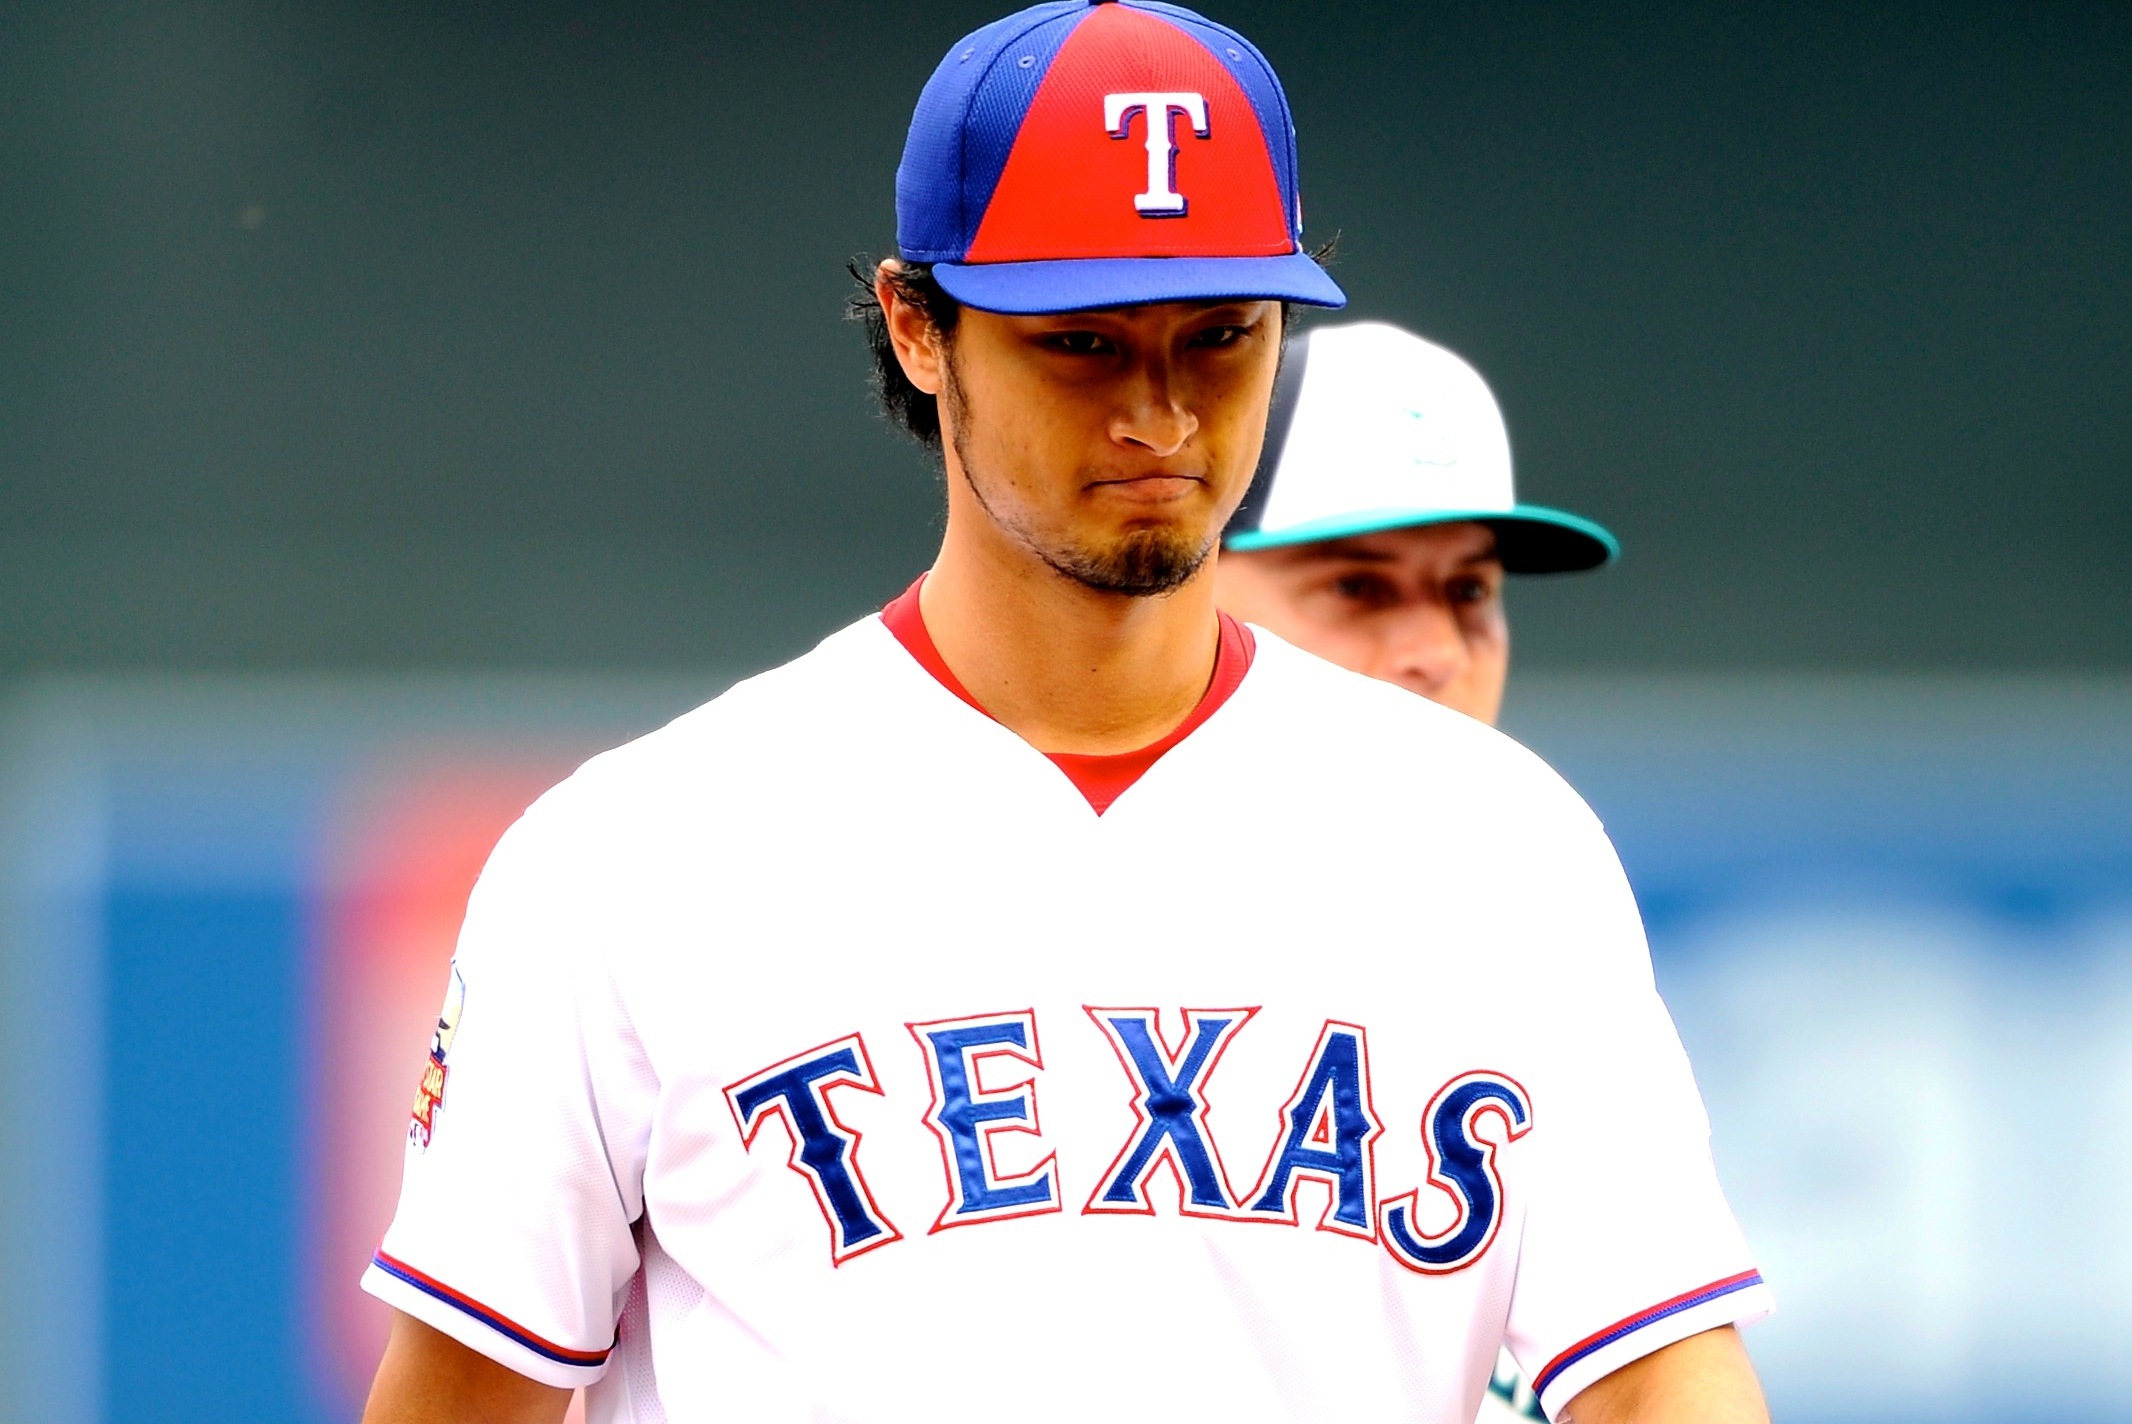 Rangers ace Yu Darvish has partially torn elbow ligament